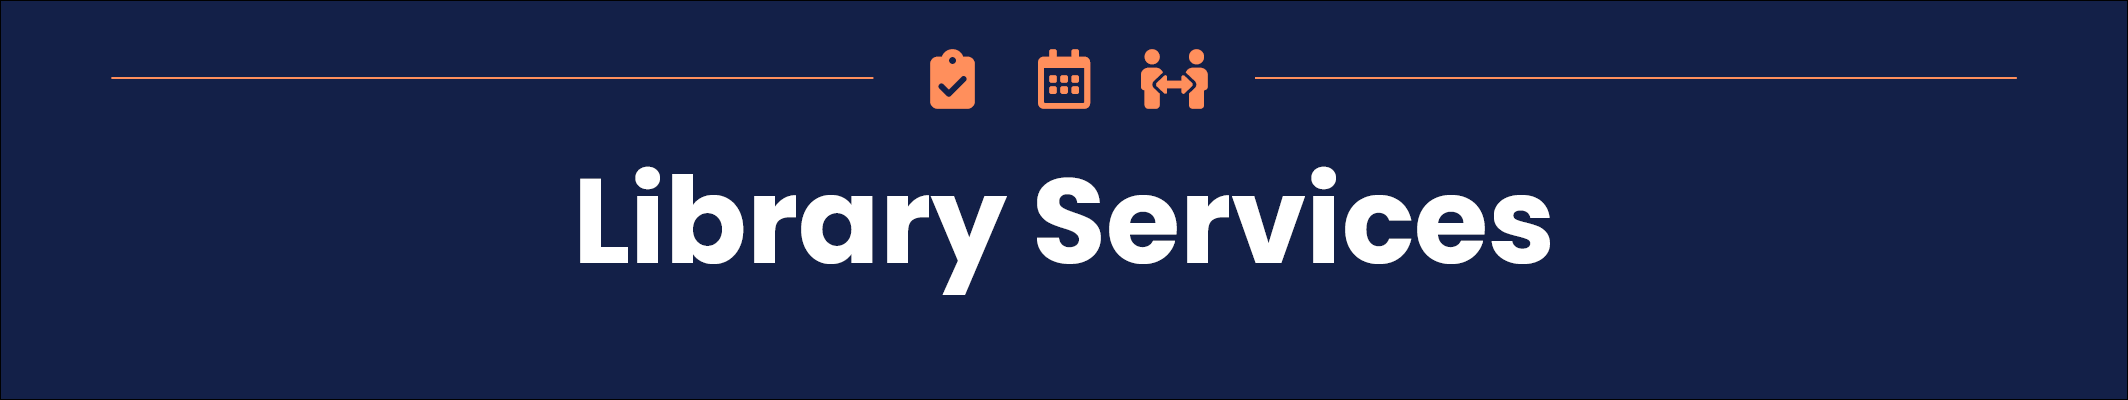 Library Services Banner